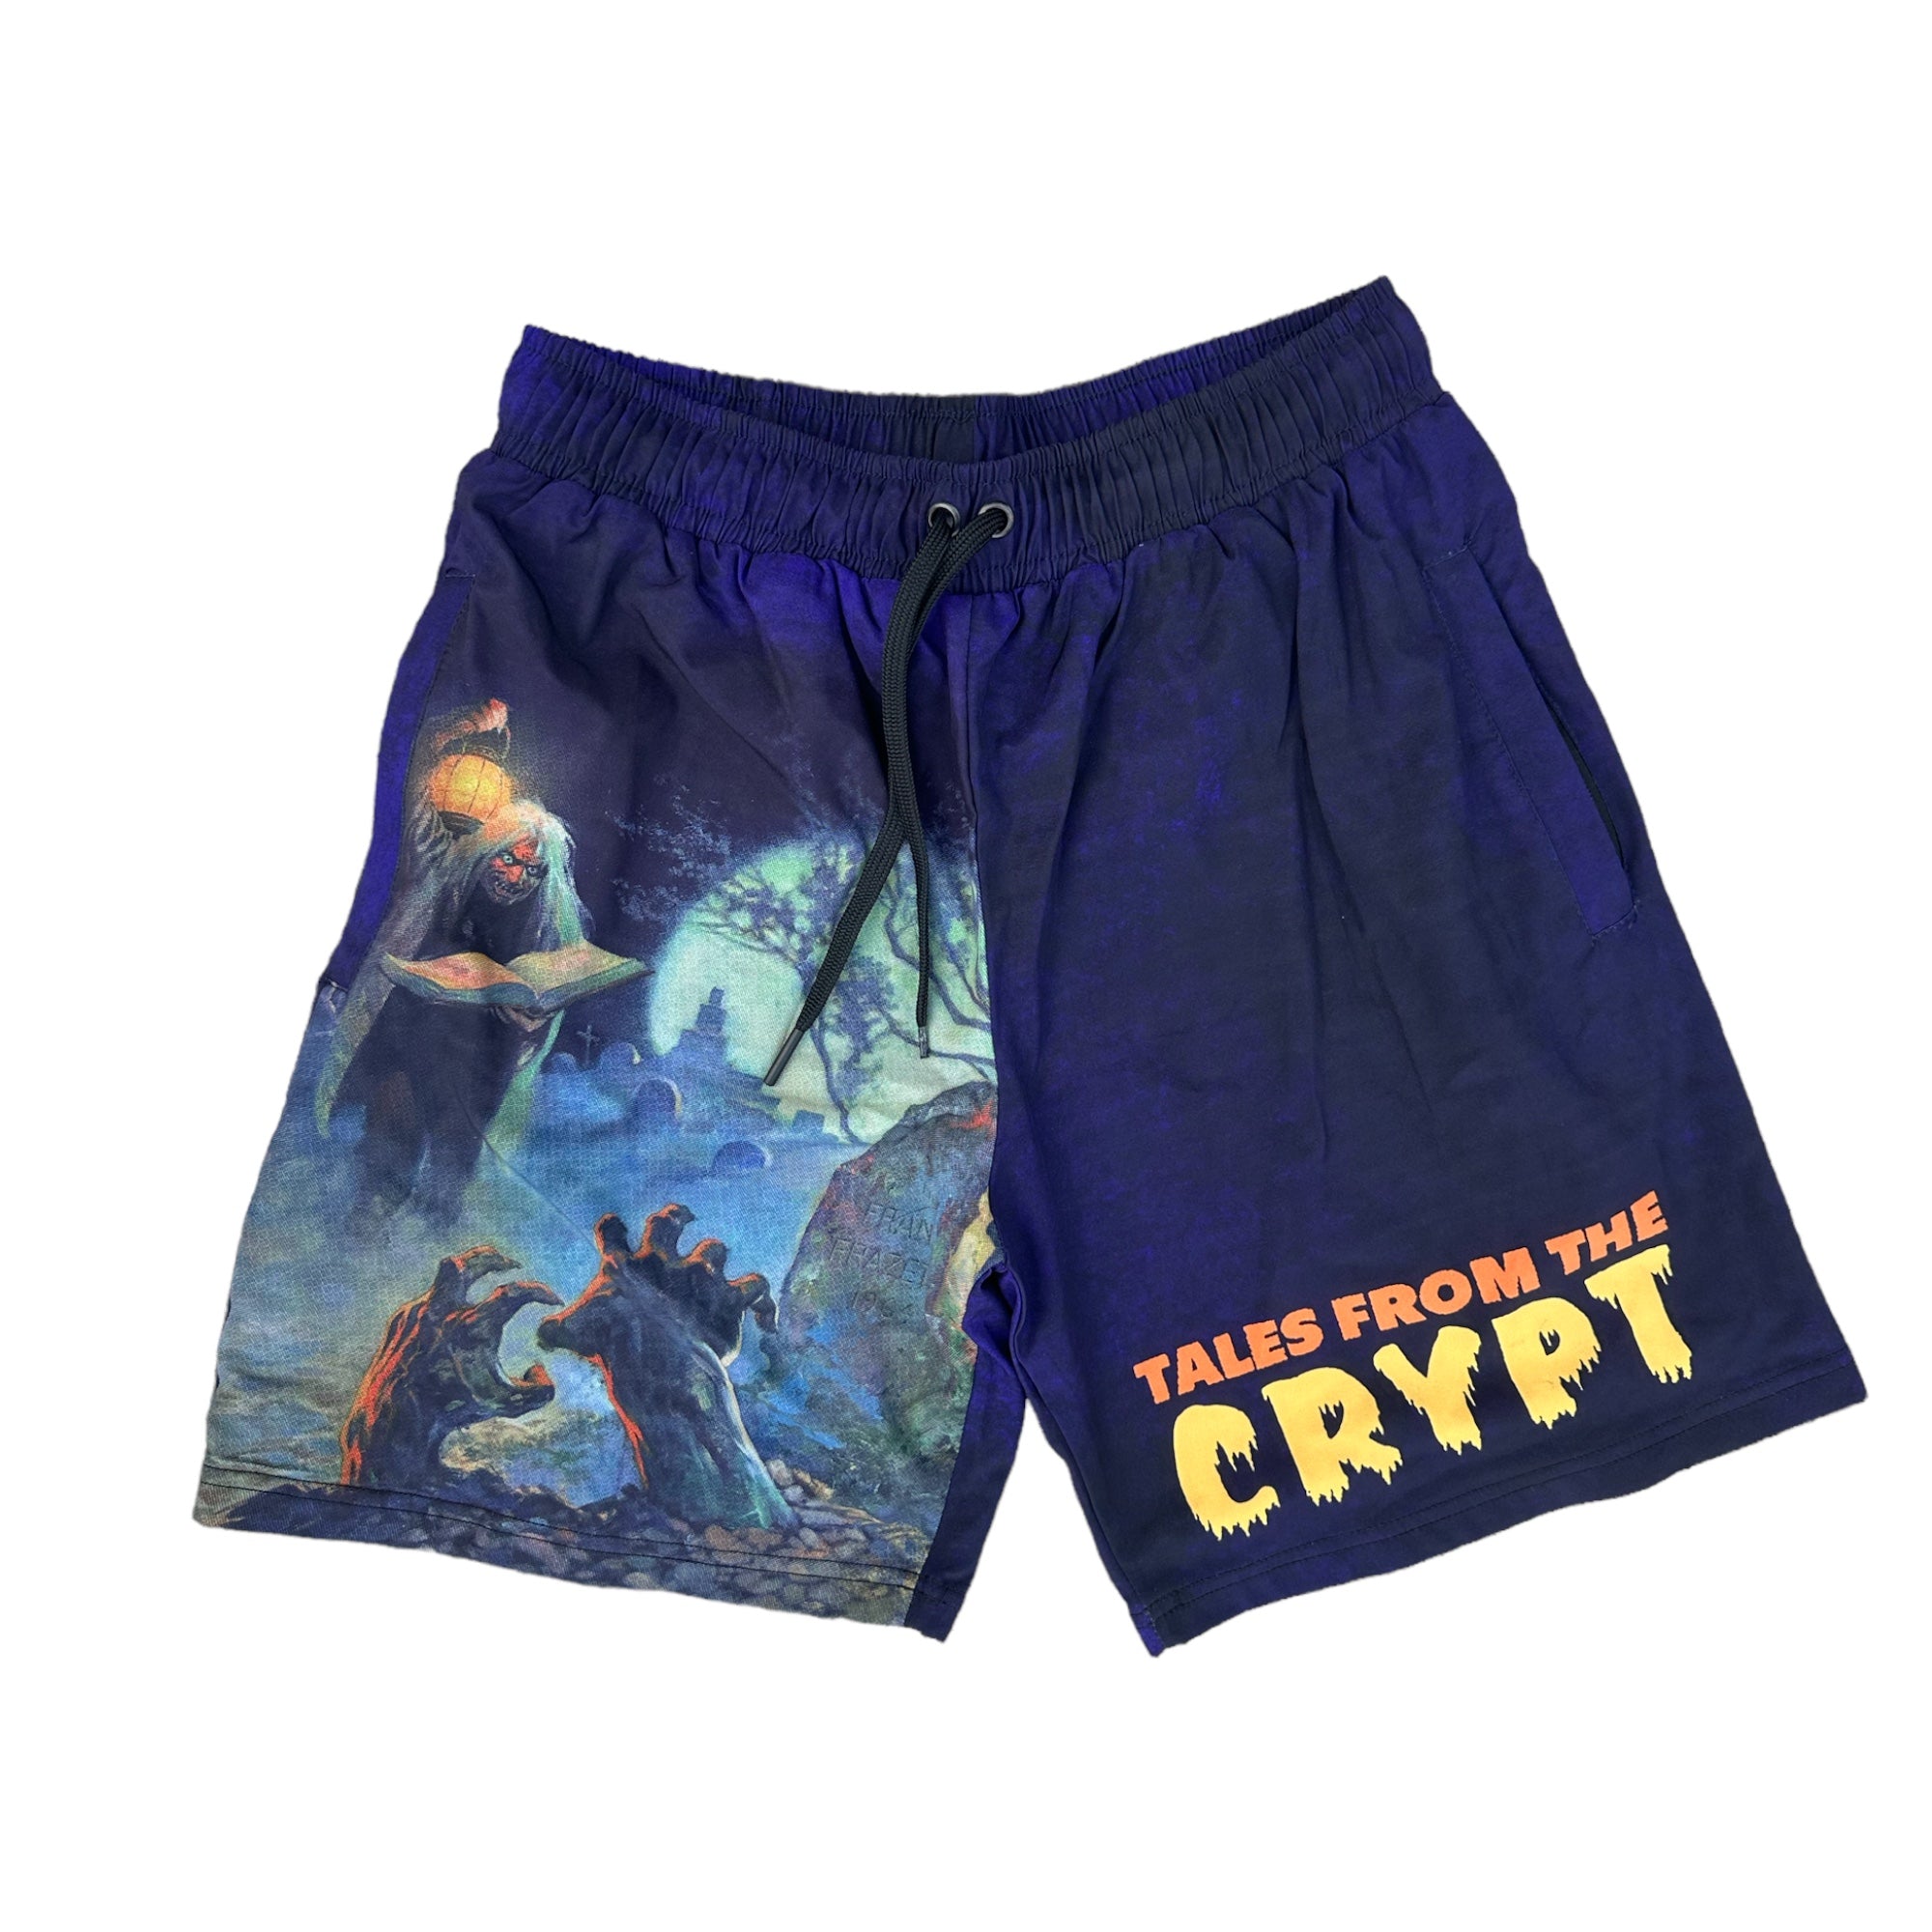 Tales from the Crypt Drawstring Shorts